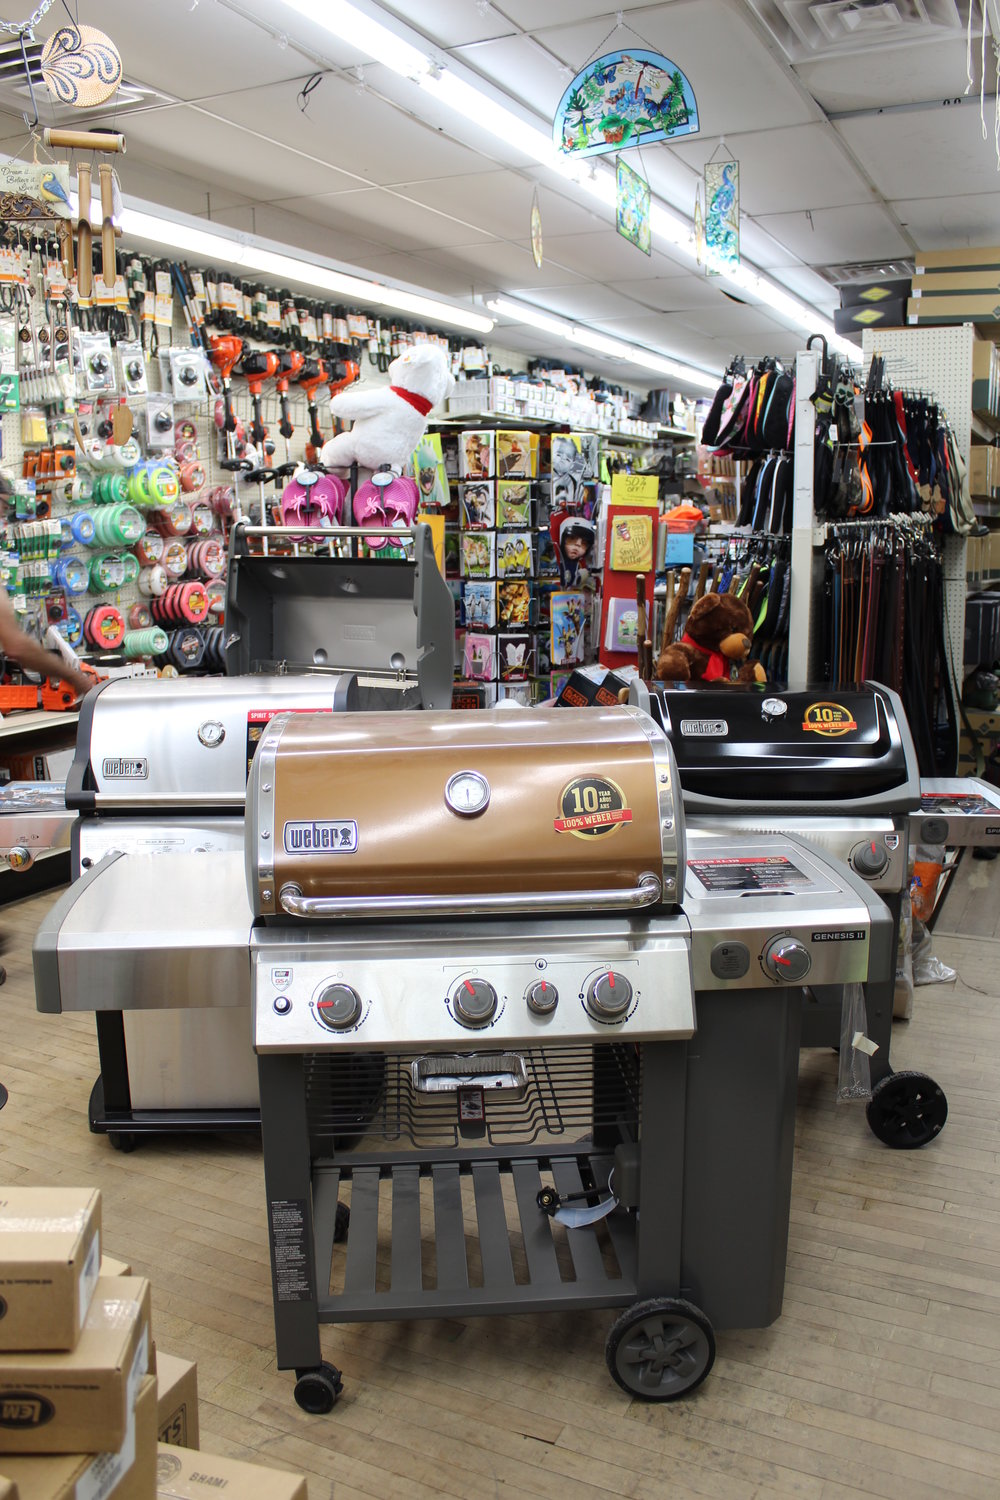 Find your outdoor cooking needs at Delaware Valley Farm and Garden.